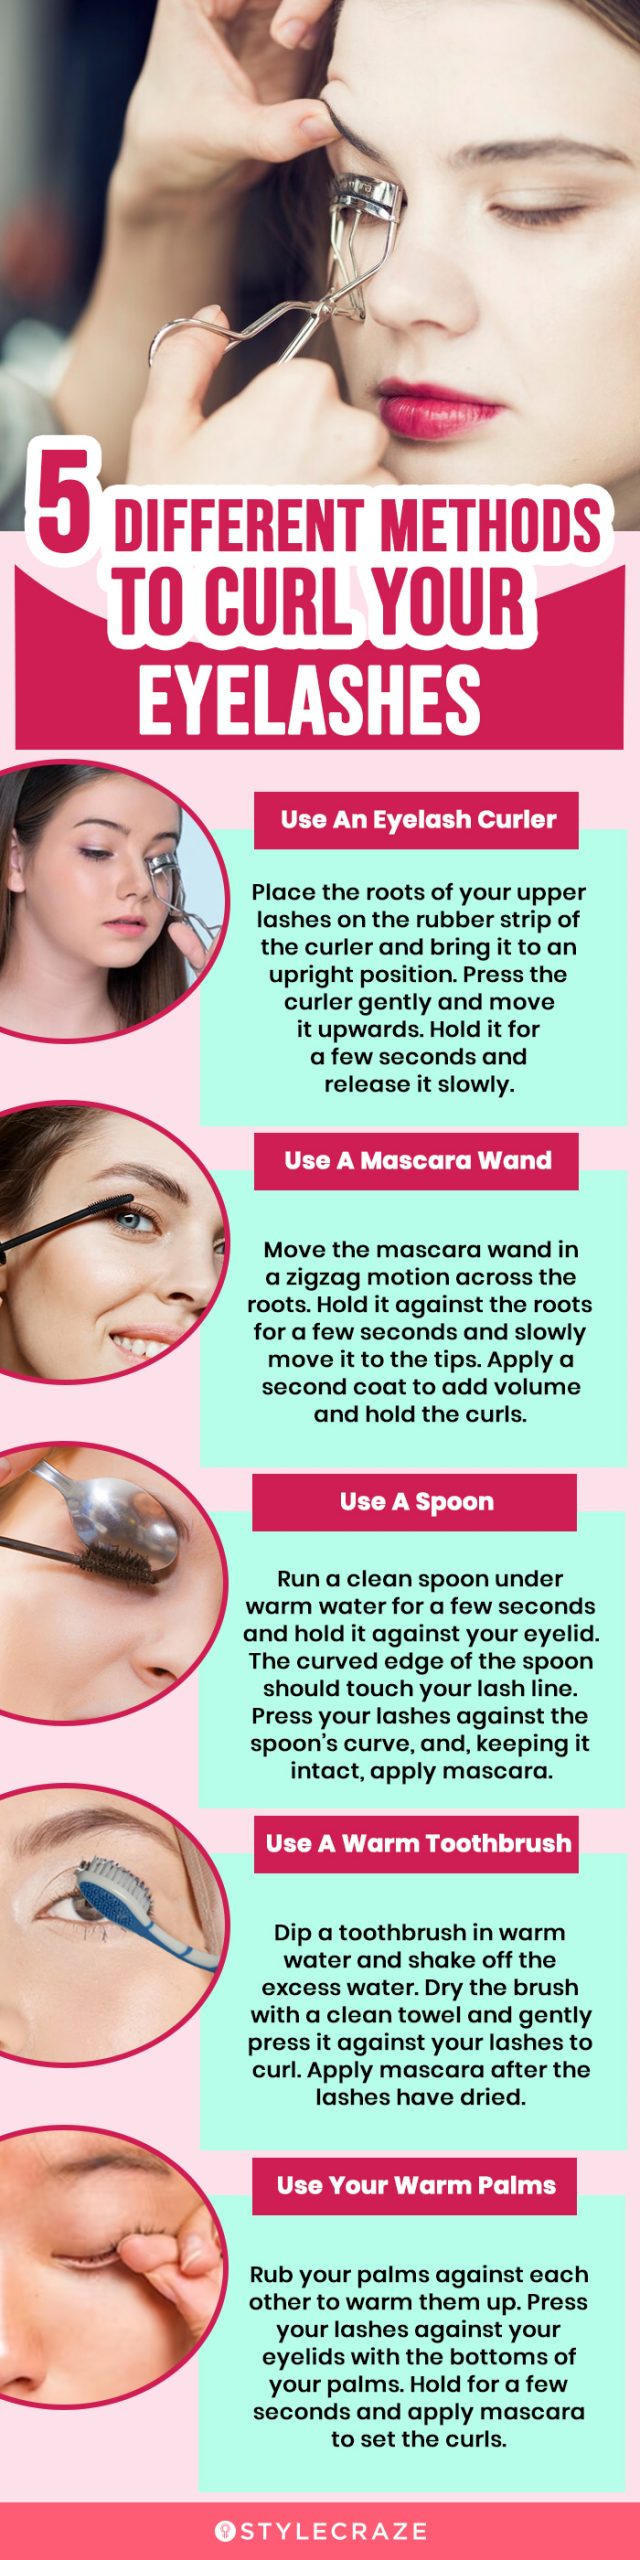 5 different methods to curl your eyelashes (infographic)